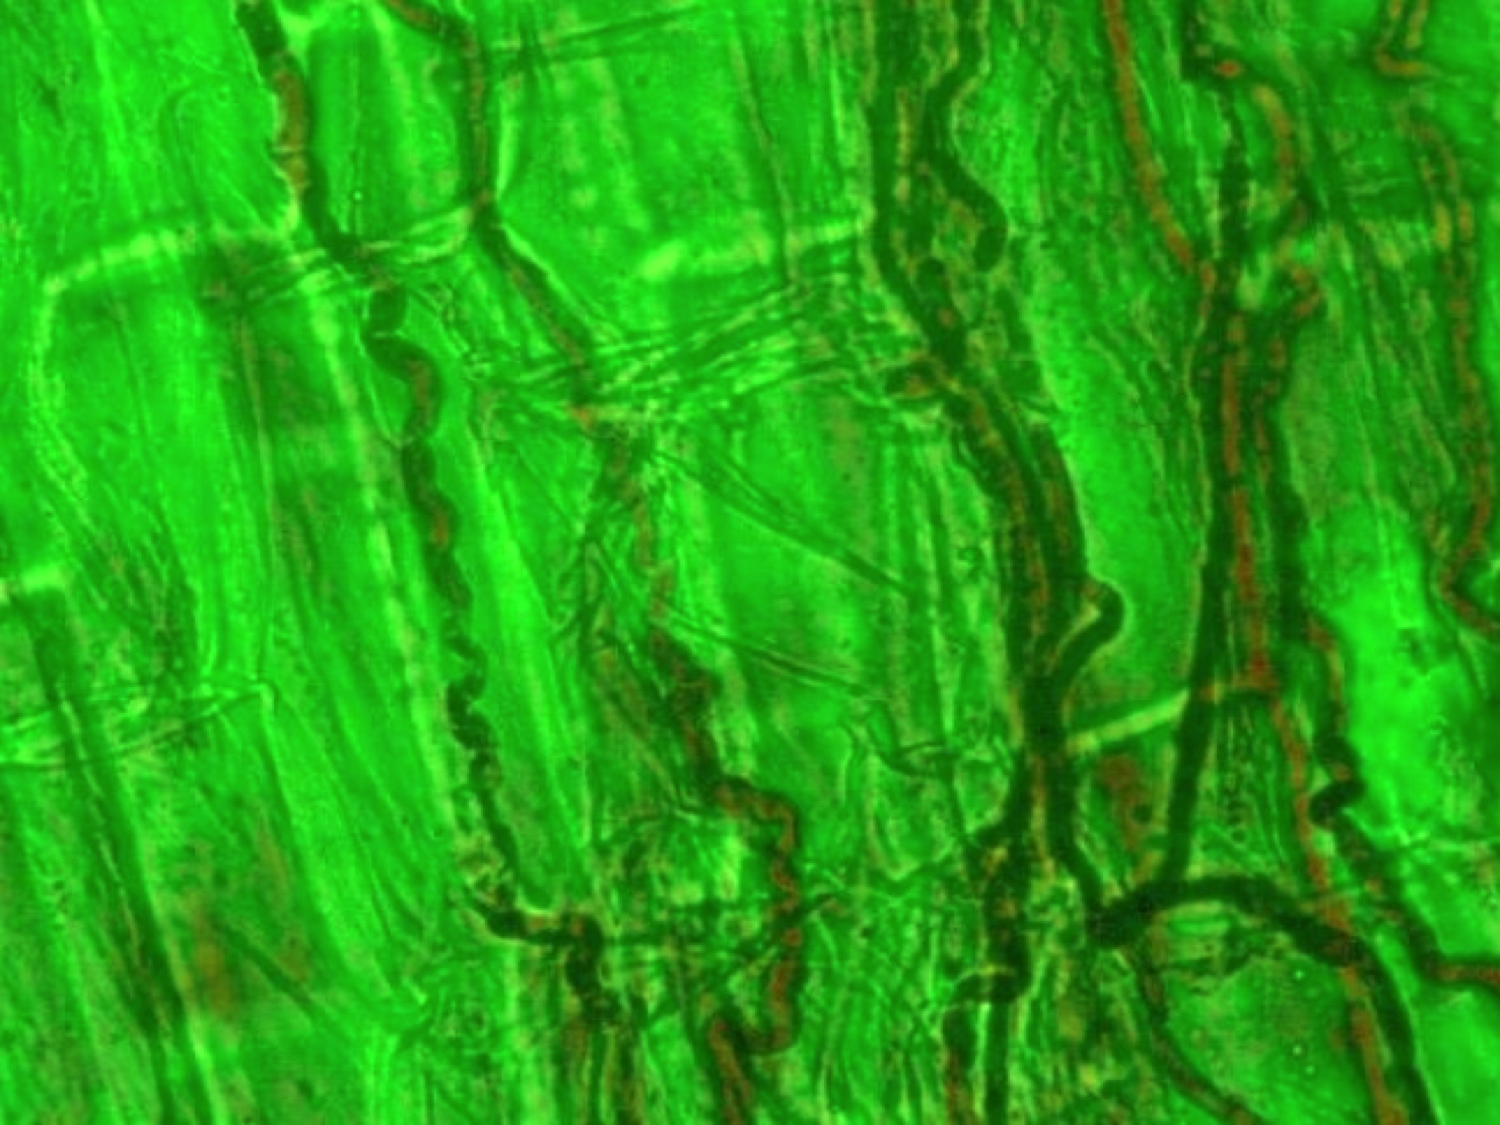 Figure 13. The fungal endophyte Epichloë festucae in tall fescue. Note the darker stained fungal hyphae growing between the plant cells.